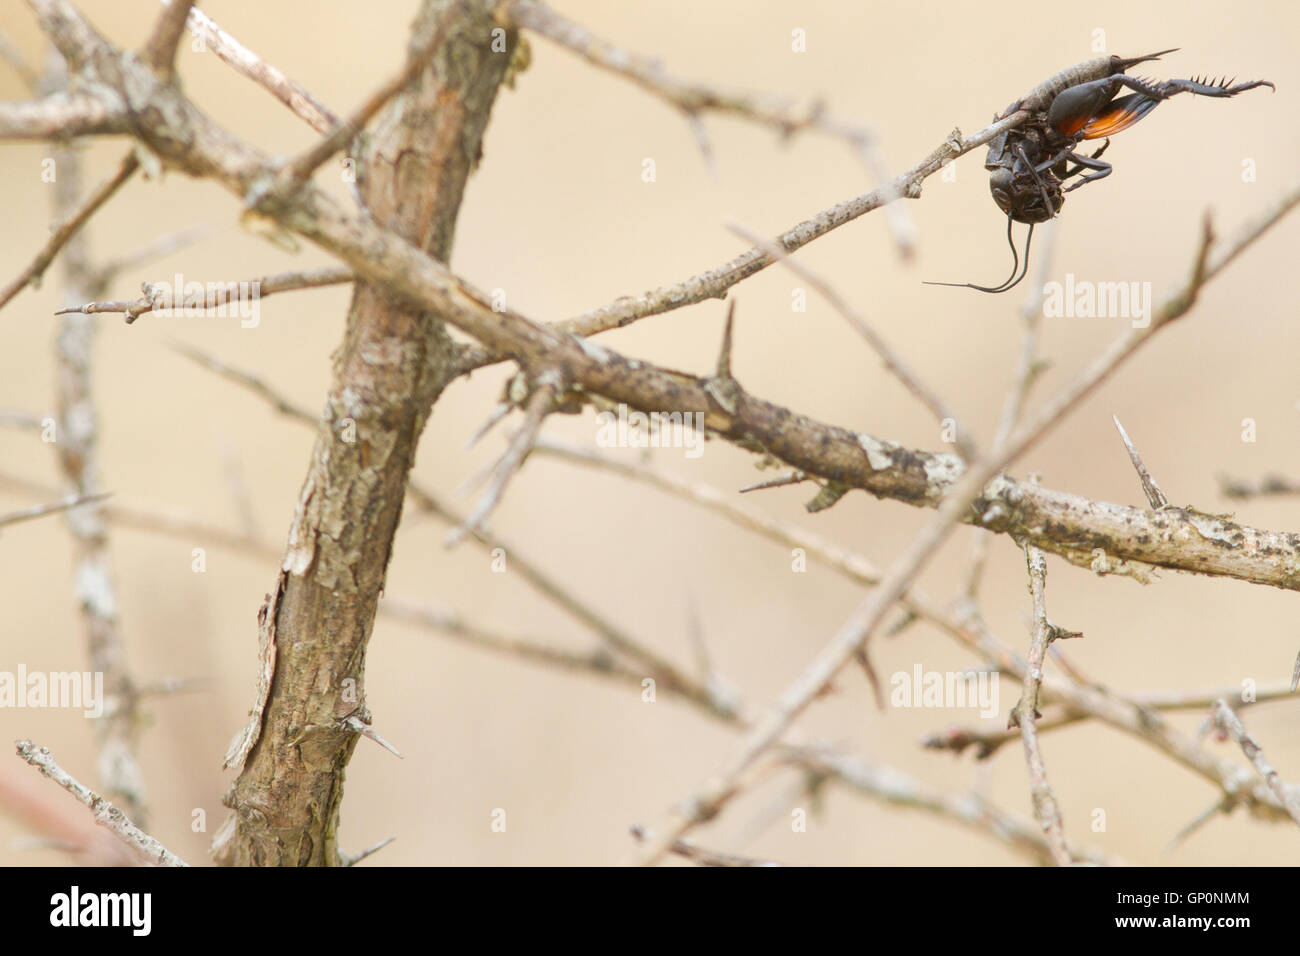 The prey of a Great grey shrike ( Lanius excubitor ): a field cricket ( Grillus campestris ) impaled upon a thorn Stock Photo